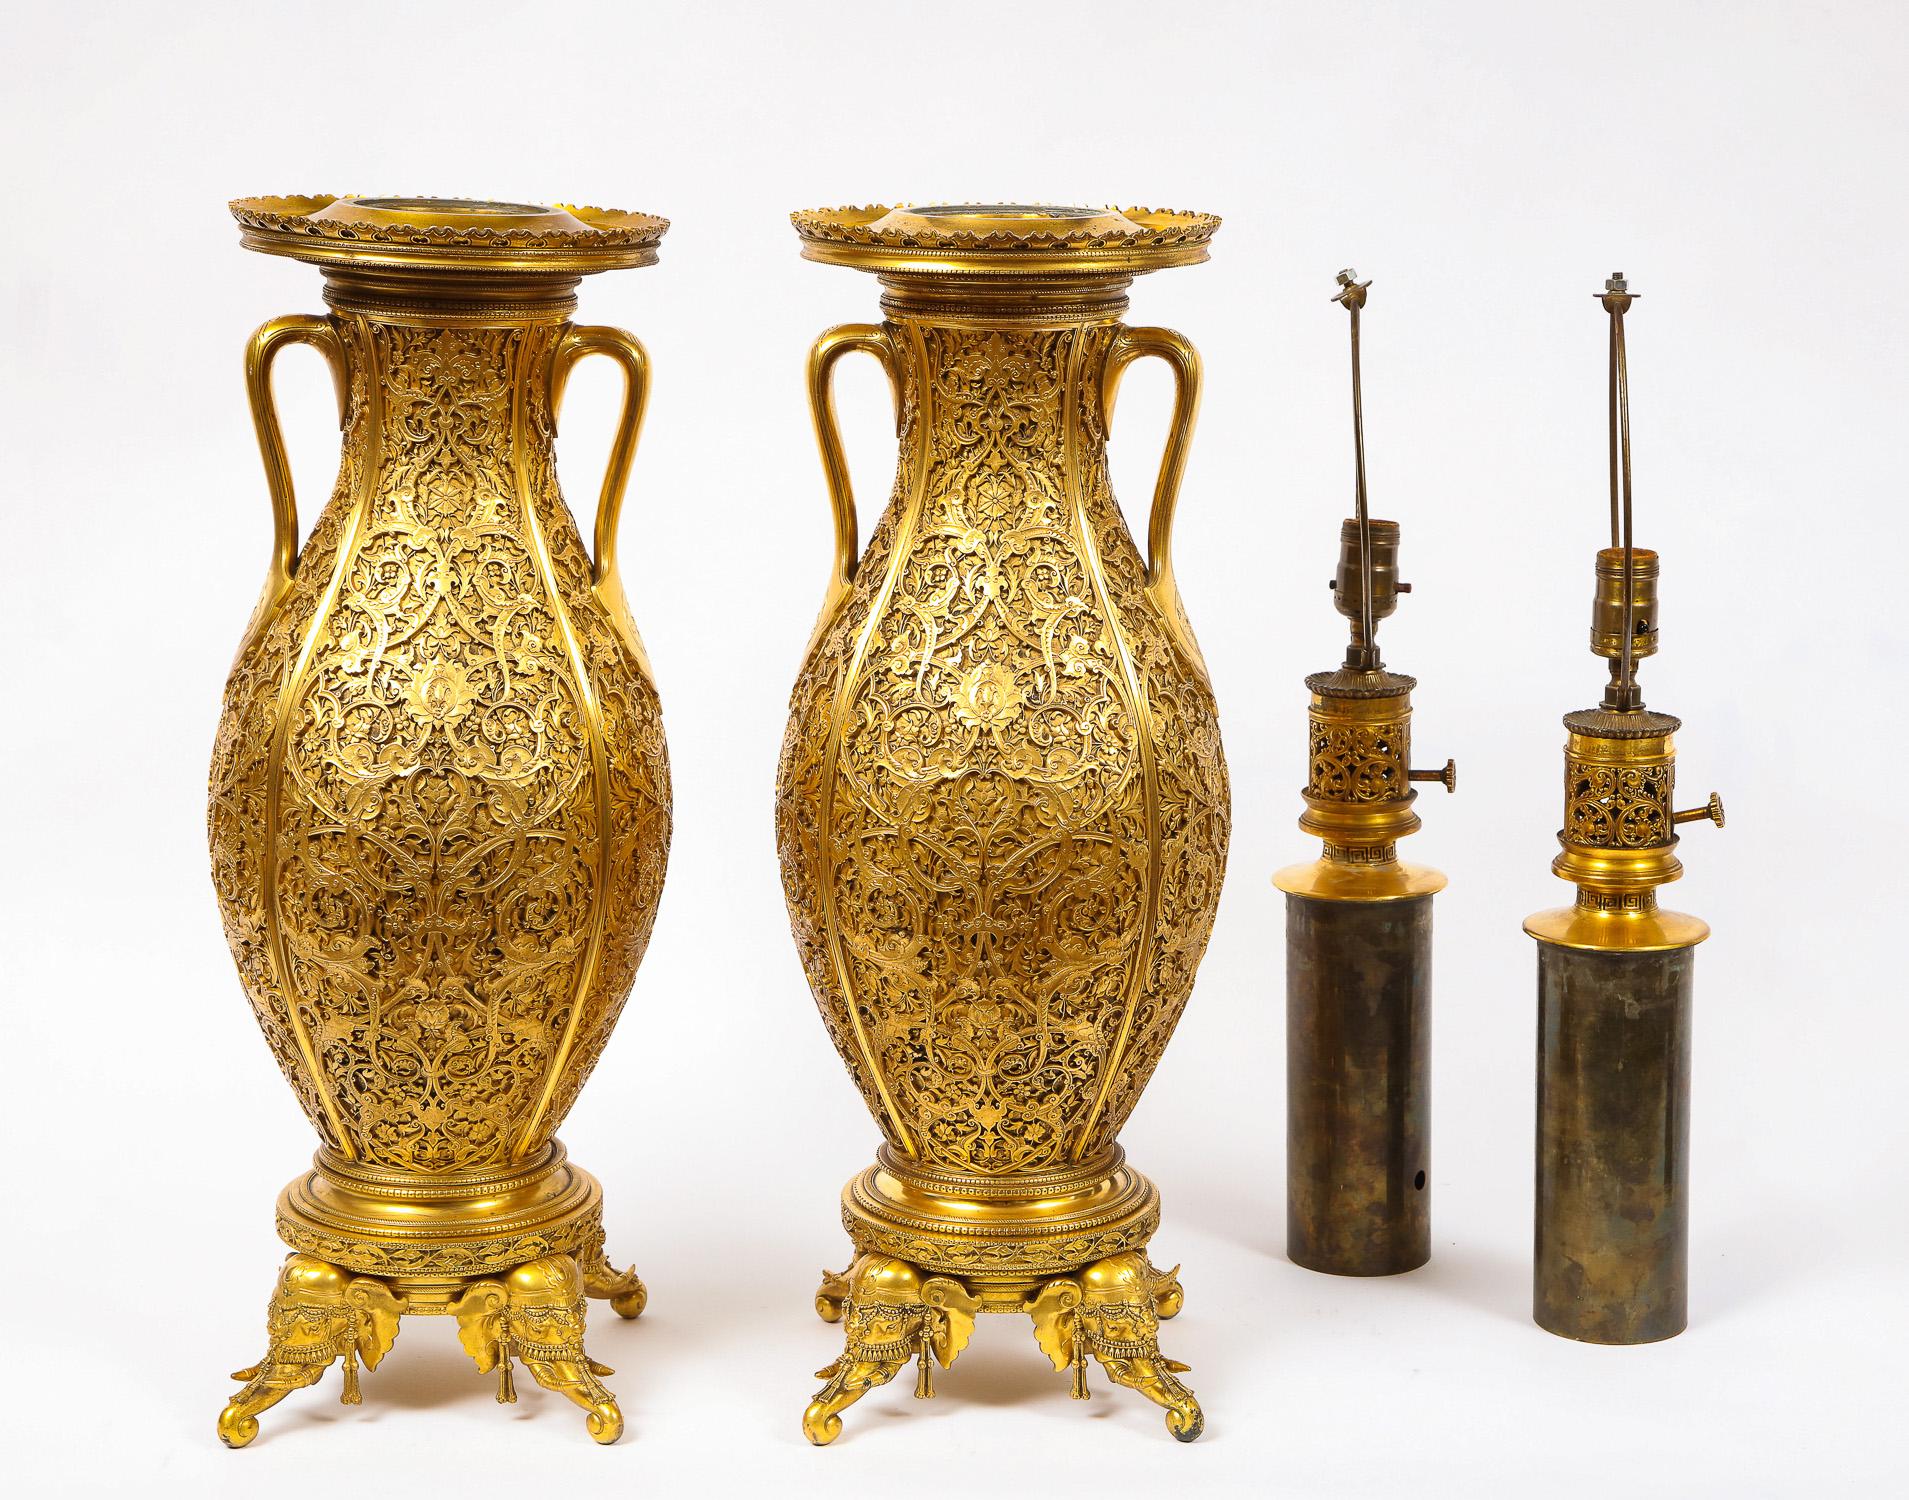 Pair of French Japonisme Ormolu Vases E. Lièvre, Executed by F. Barbedienne For Sale 10